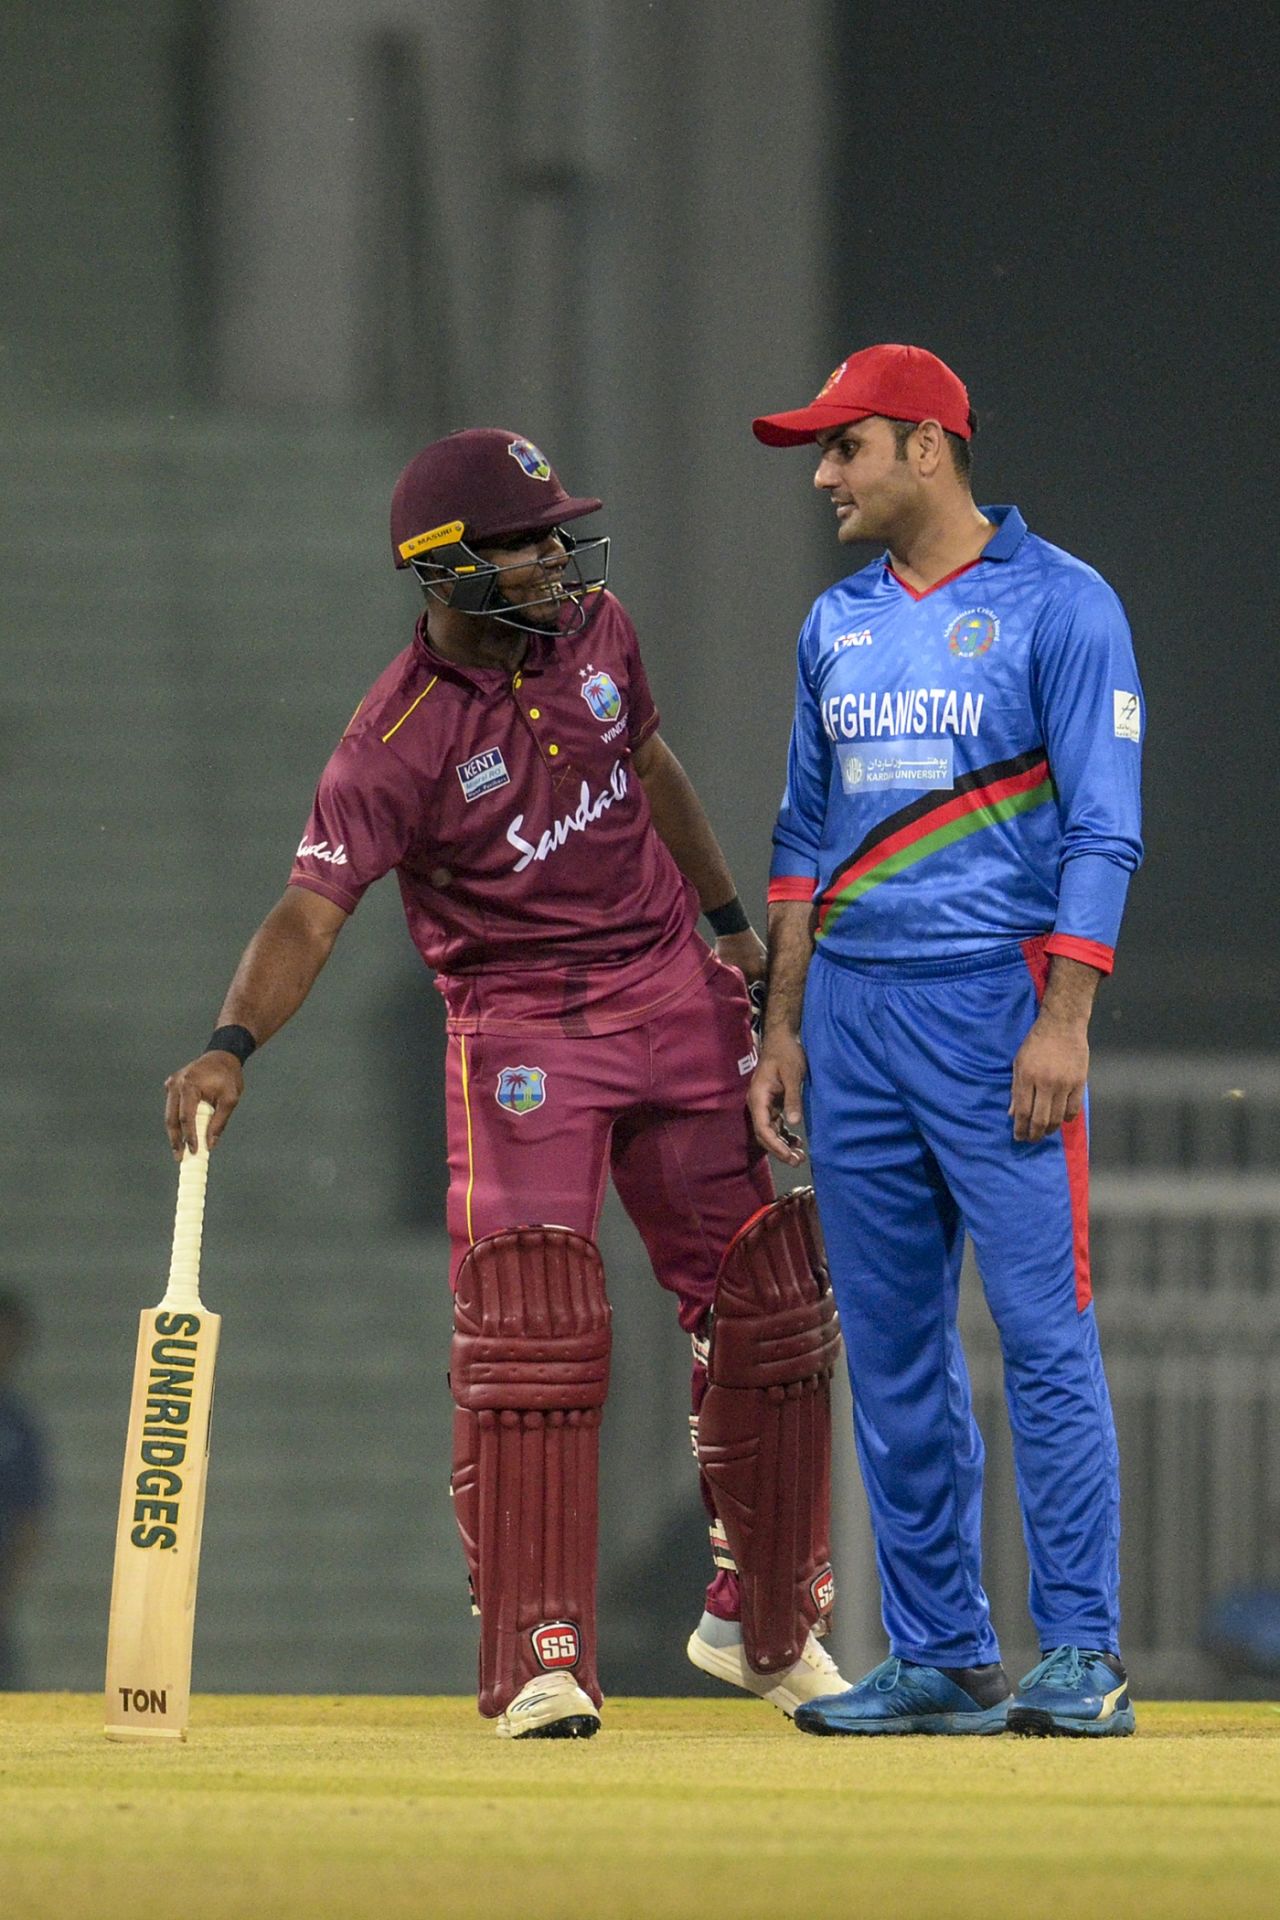 Evin Lewis and Mohammad Nabi have a chat, Afghanistan v West Indies, 1st T20I, Lucknow, November 14, 2019